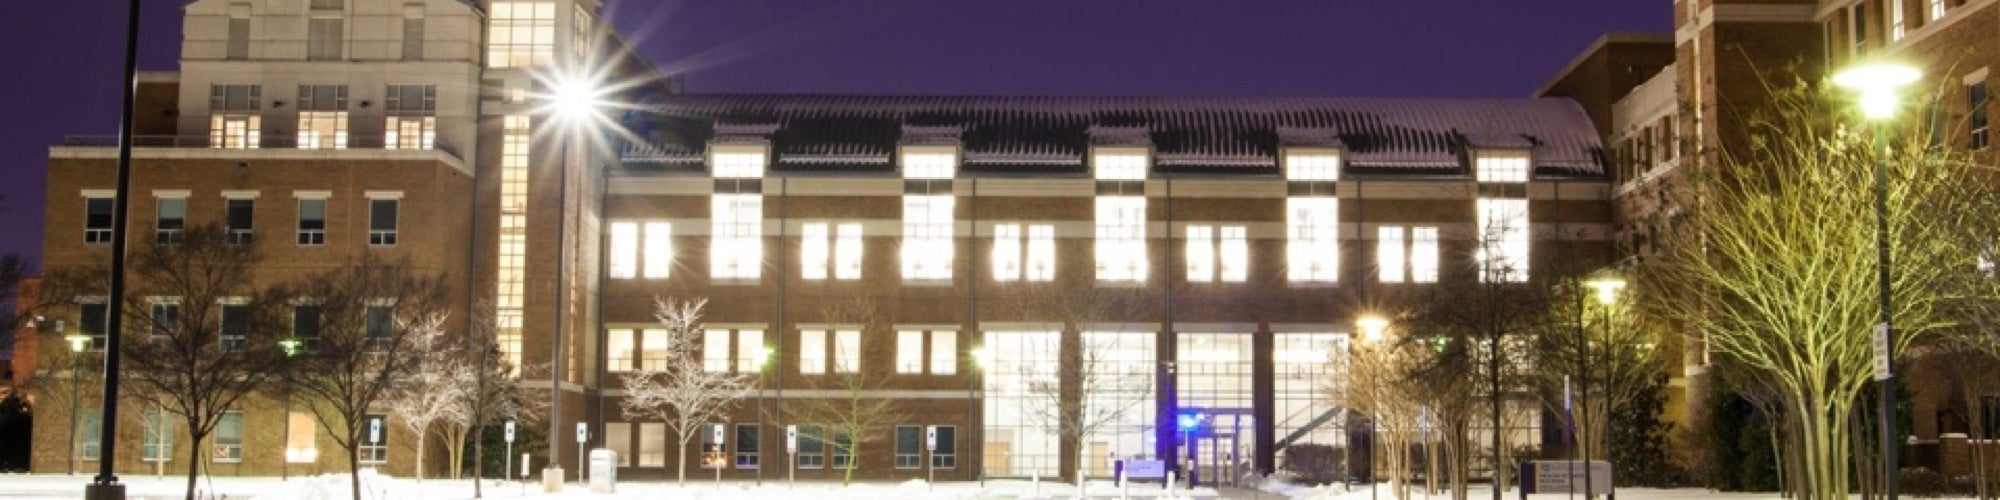 Laupus Library at Night in the Snow